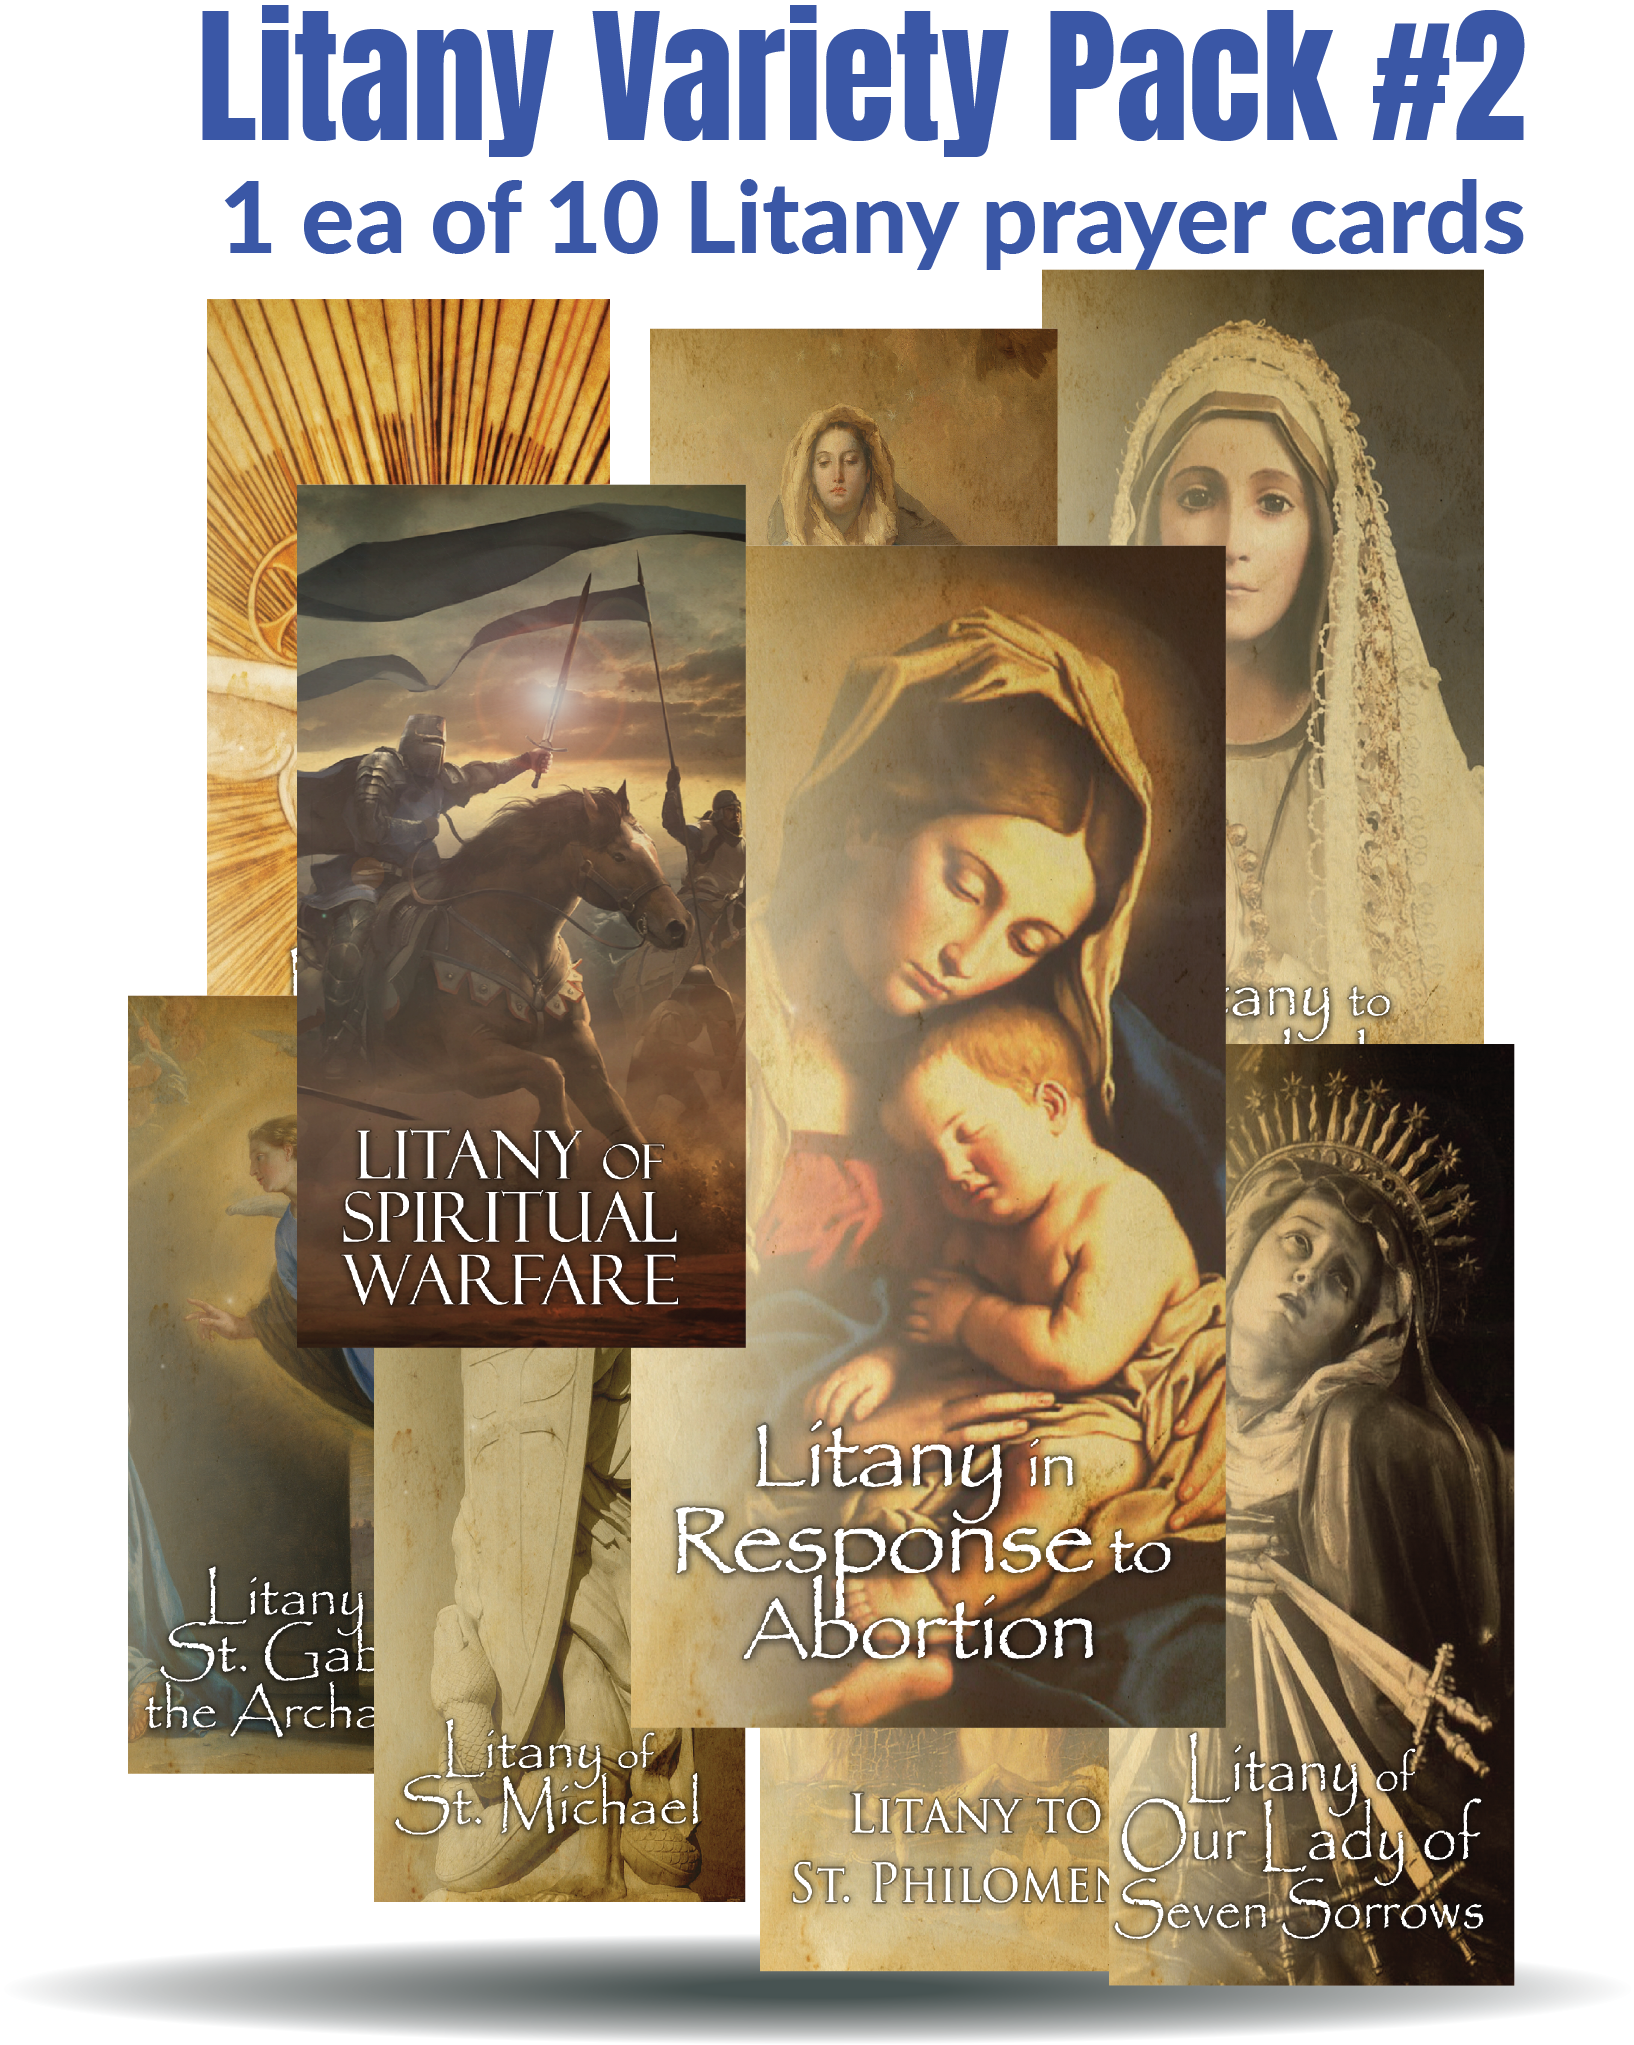 Litany Card Variety Pack #2